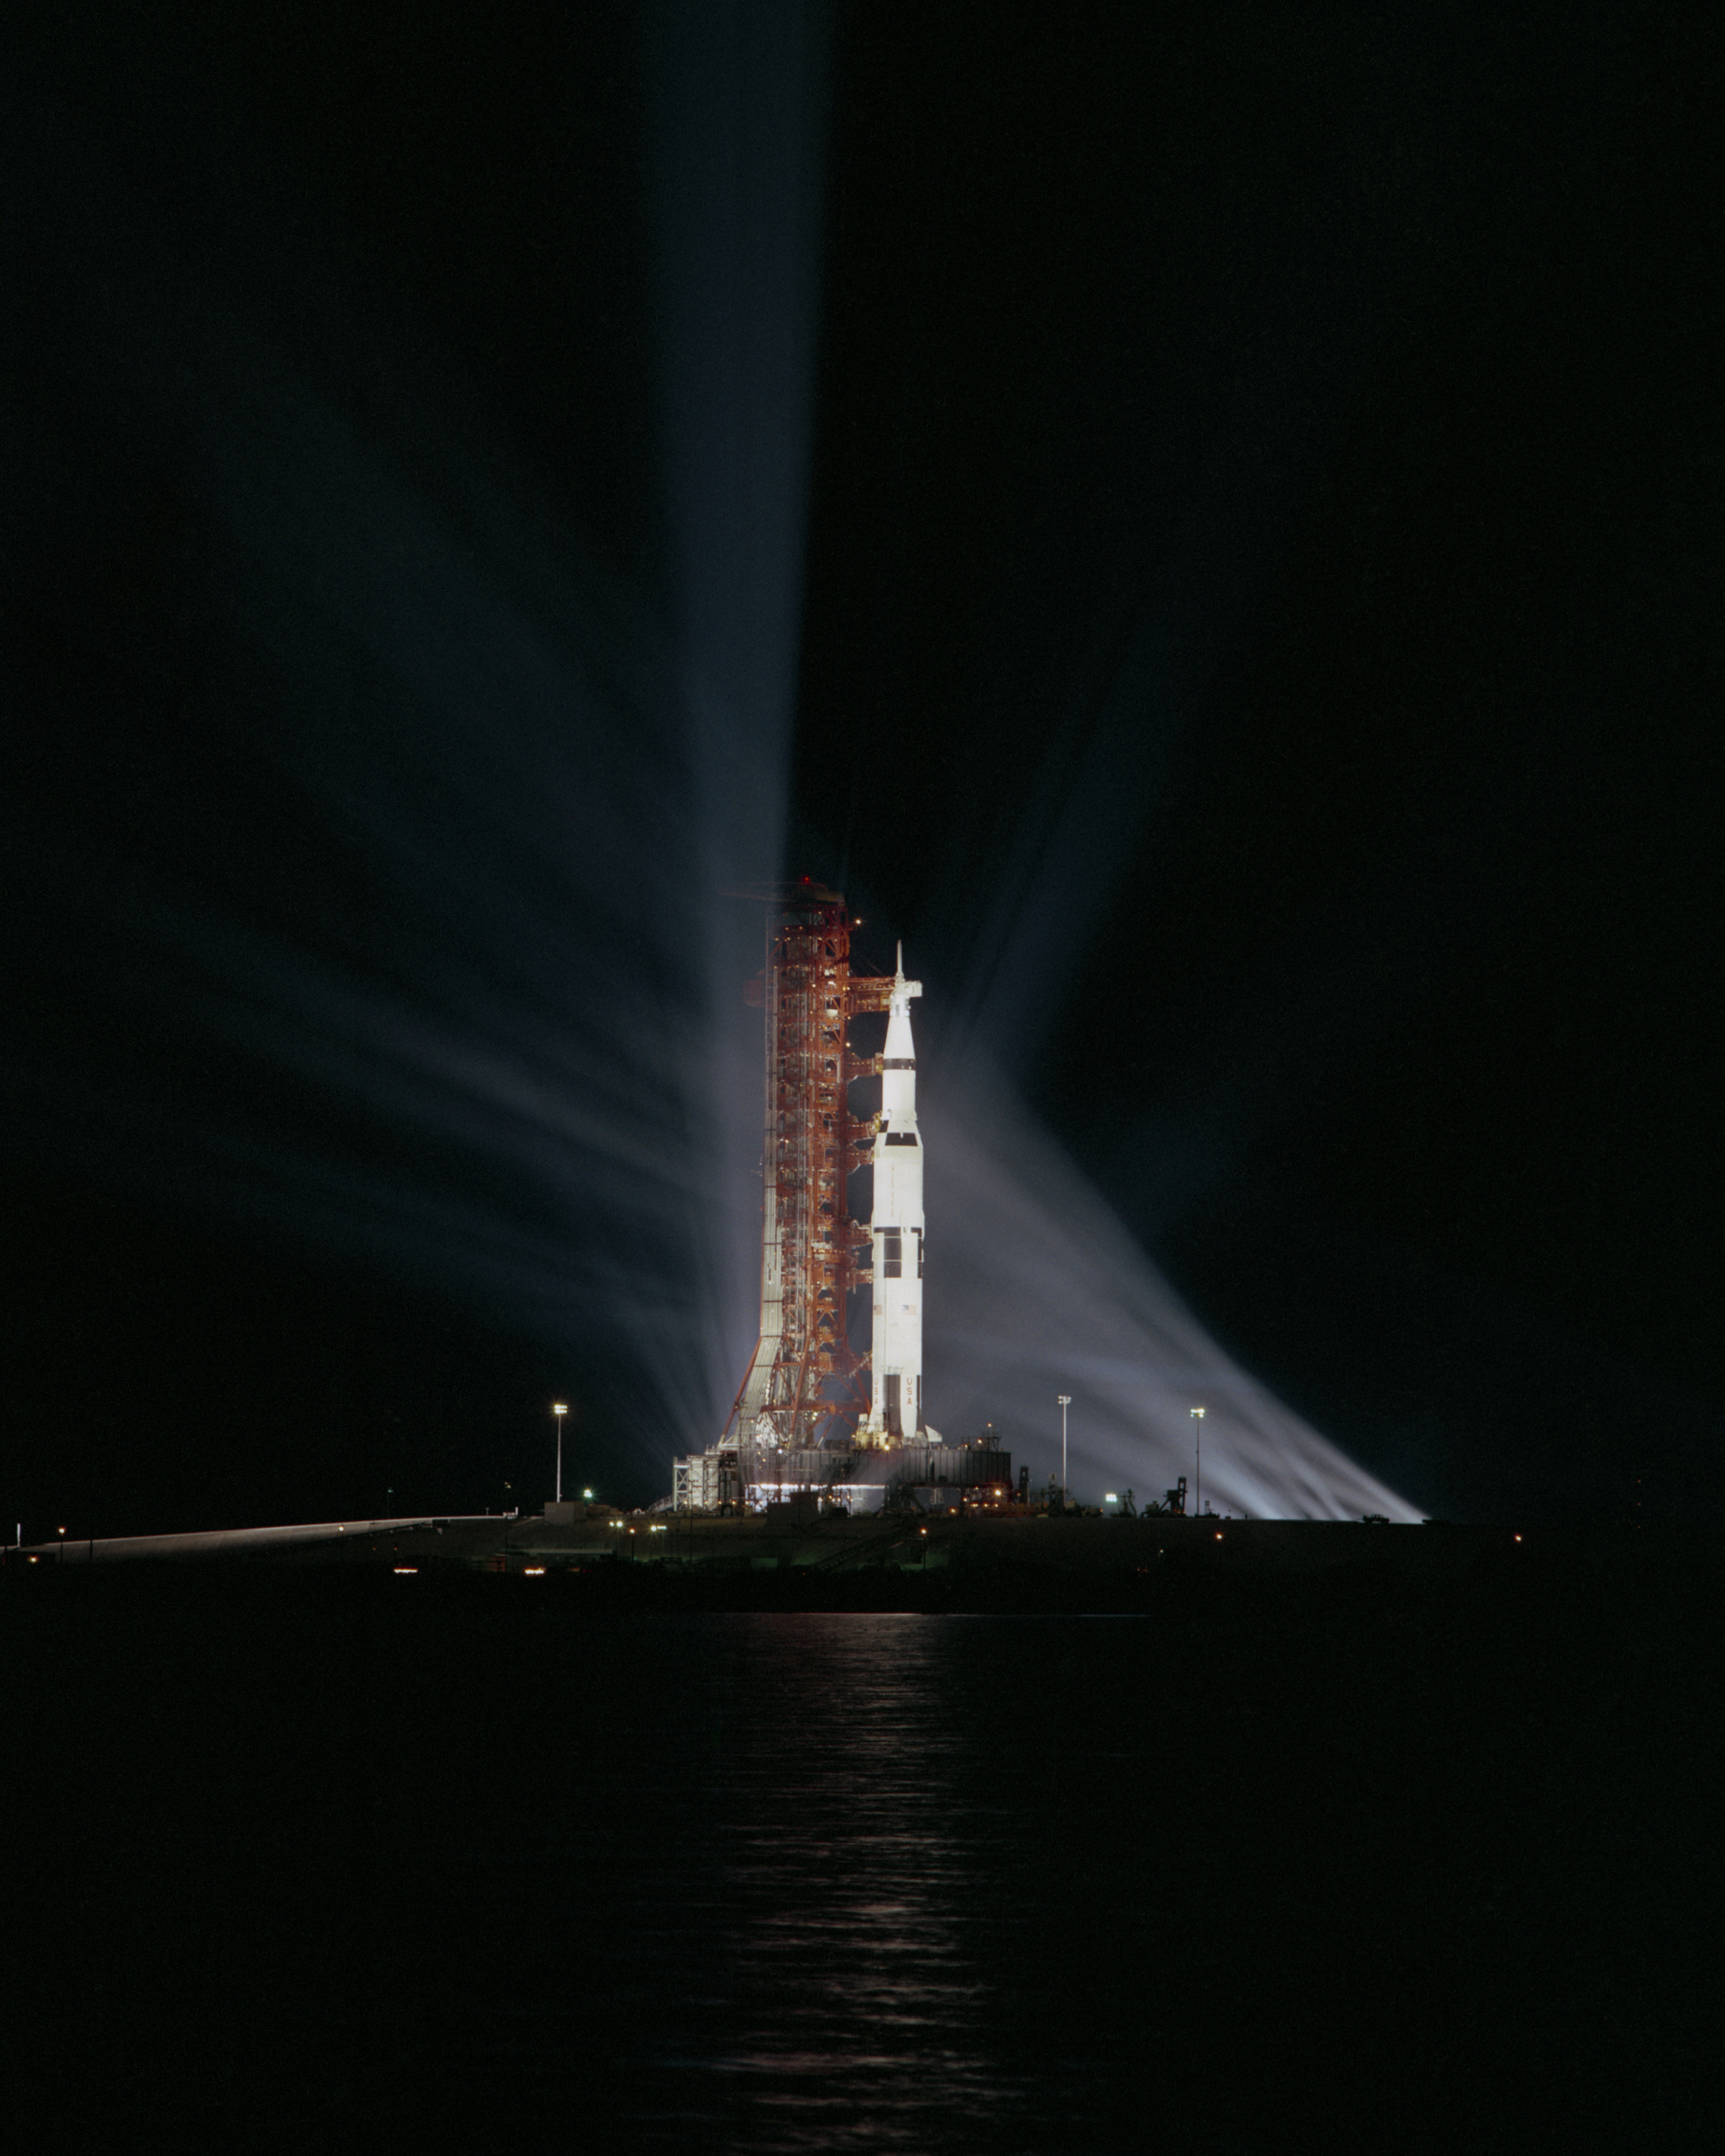 Part 2: Apollo 8 - In the Beginning There Was Liftoff - NASA